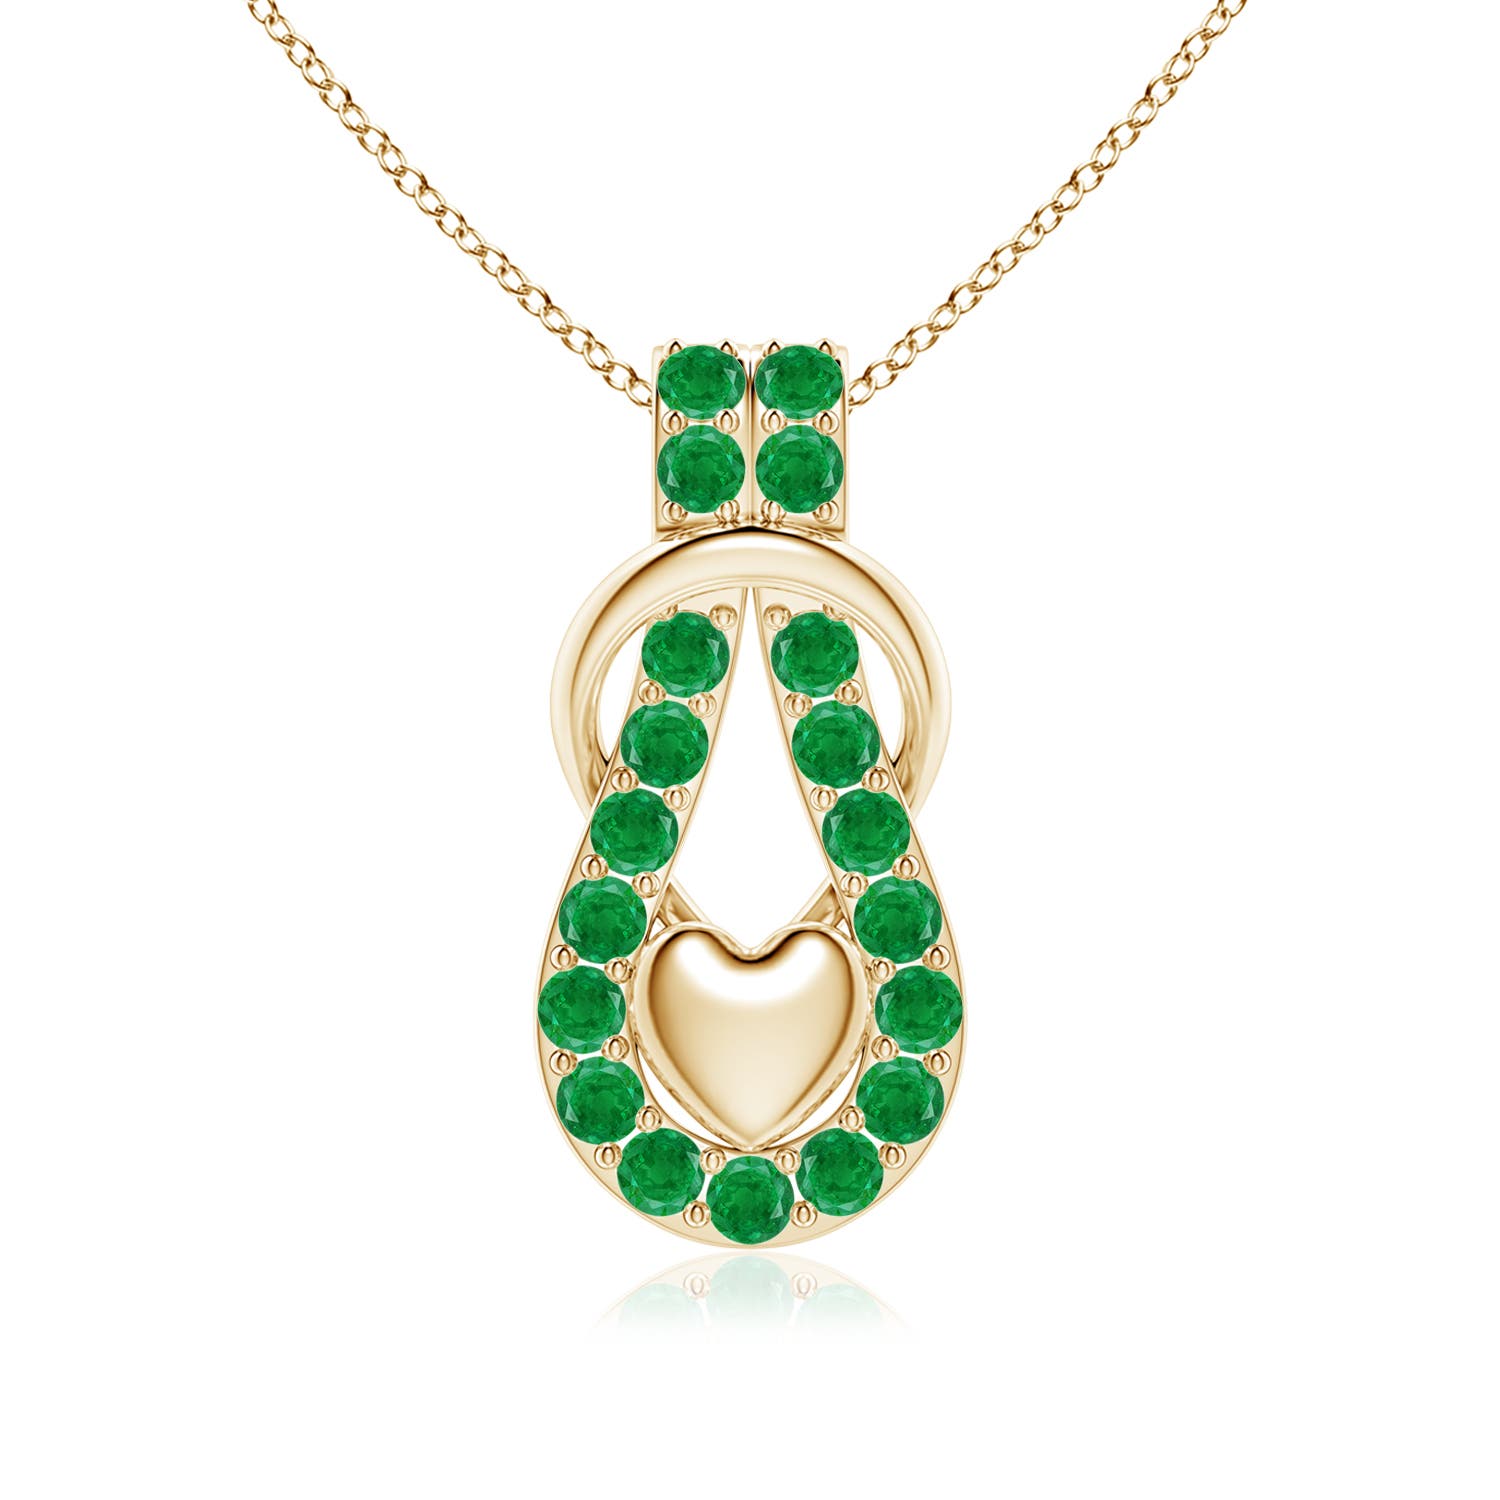 AA - Emerald / 1.9 CT / 18 KT Yellow Gold